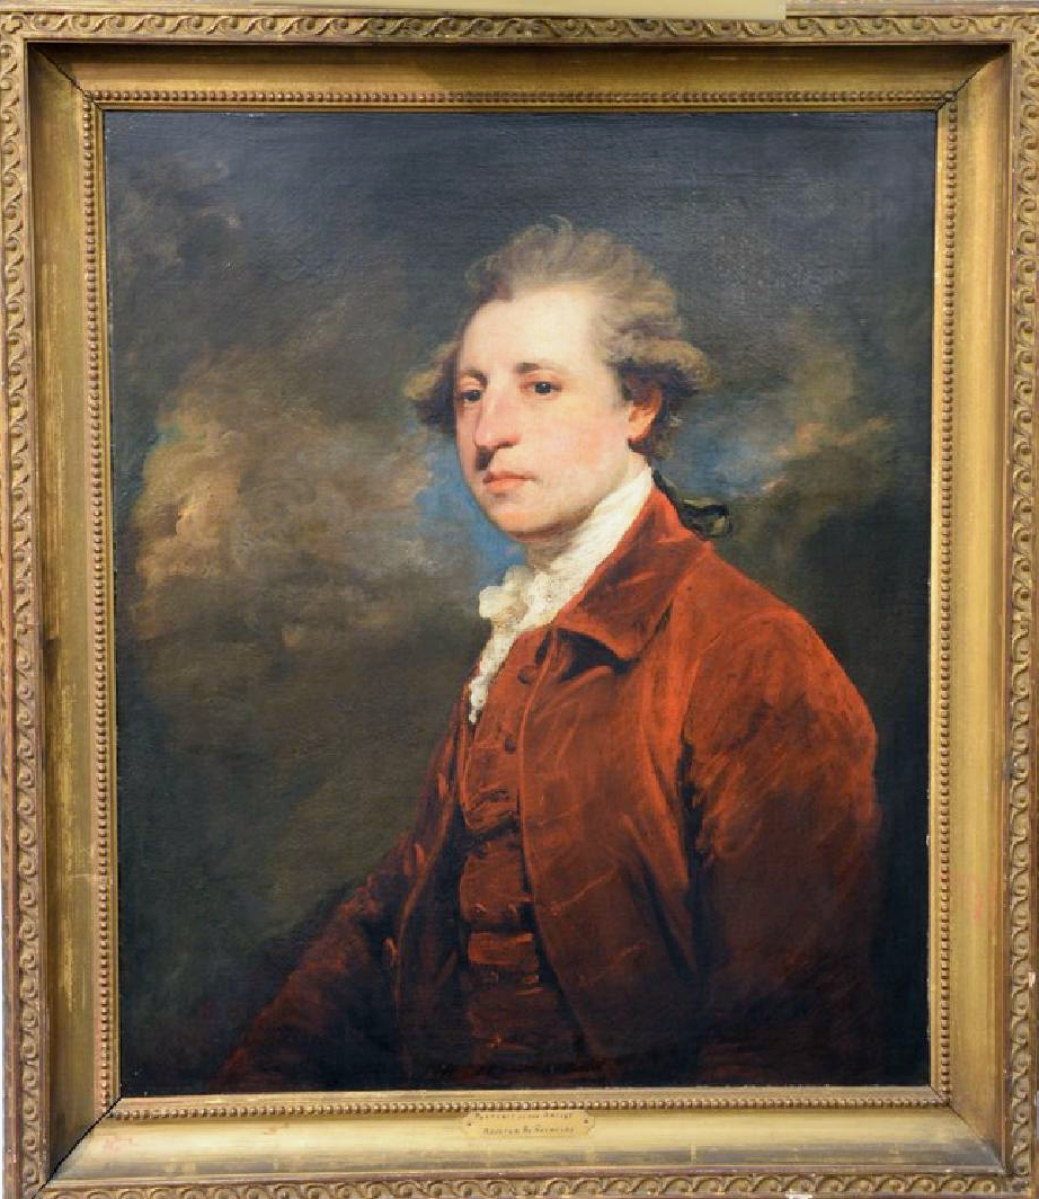 The top lot of the day went to this English portrait that was attributed to an artist in the circle of Sir Joshua Reynolds. It received a lot of attention from English bidders and went out at $30,000.